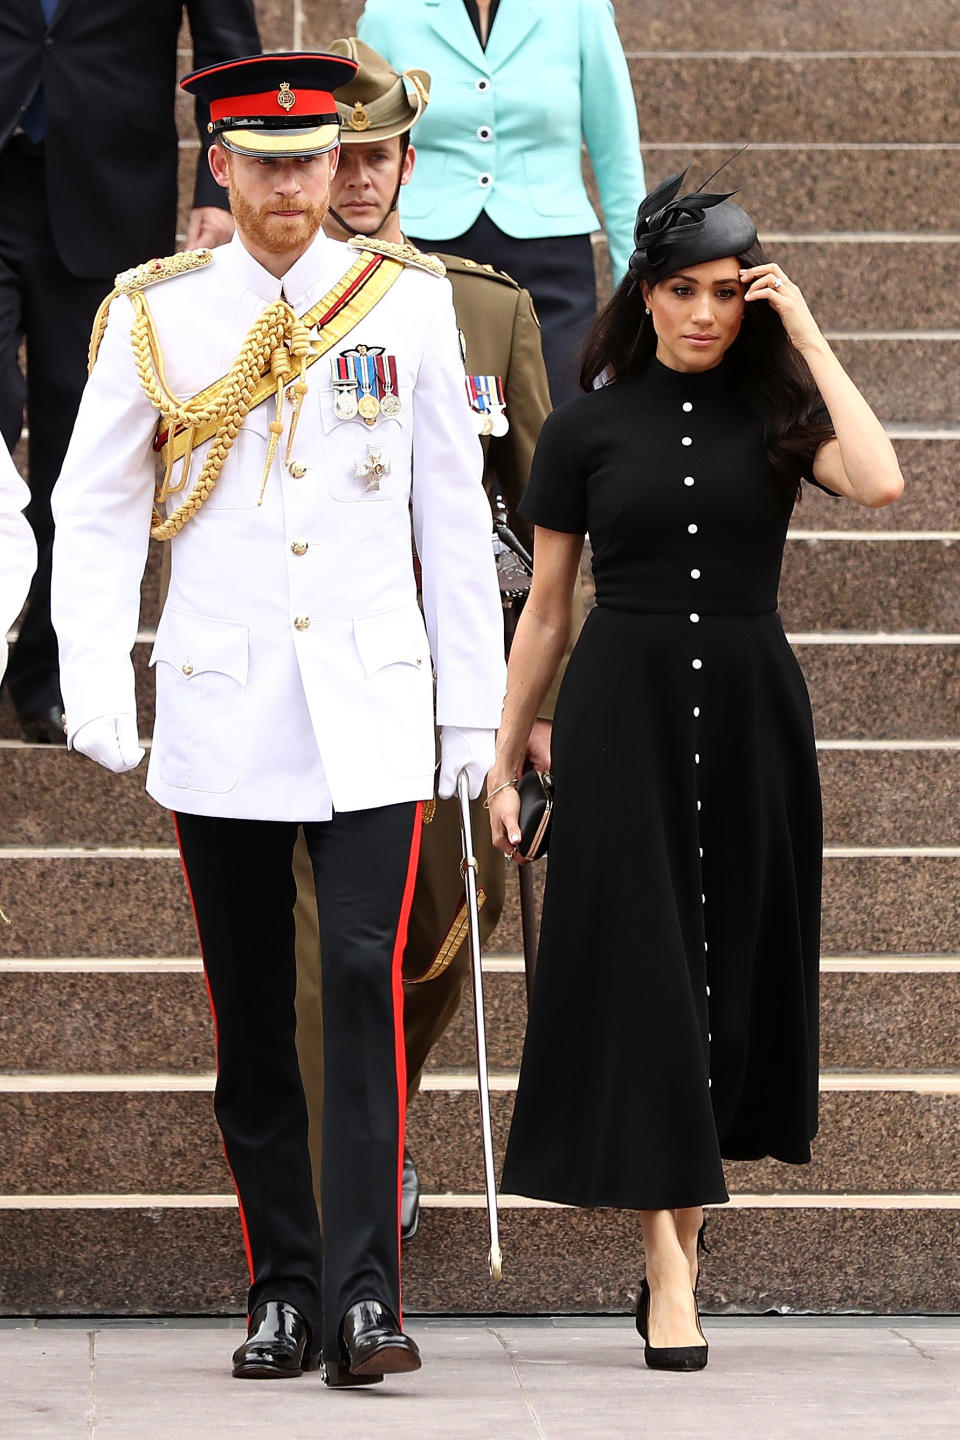 <p>Prince Harry was dressed in full military uniform, whilst Meghan Markle wore a stunning black dress. Source: Getty </p>